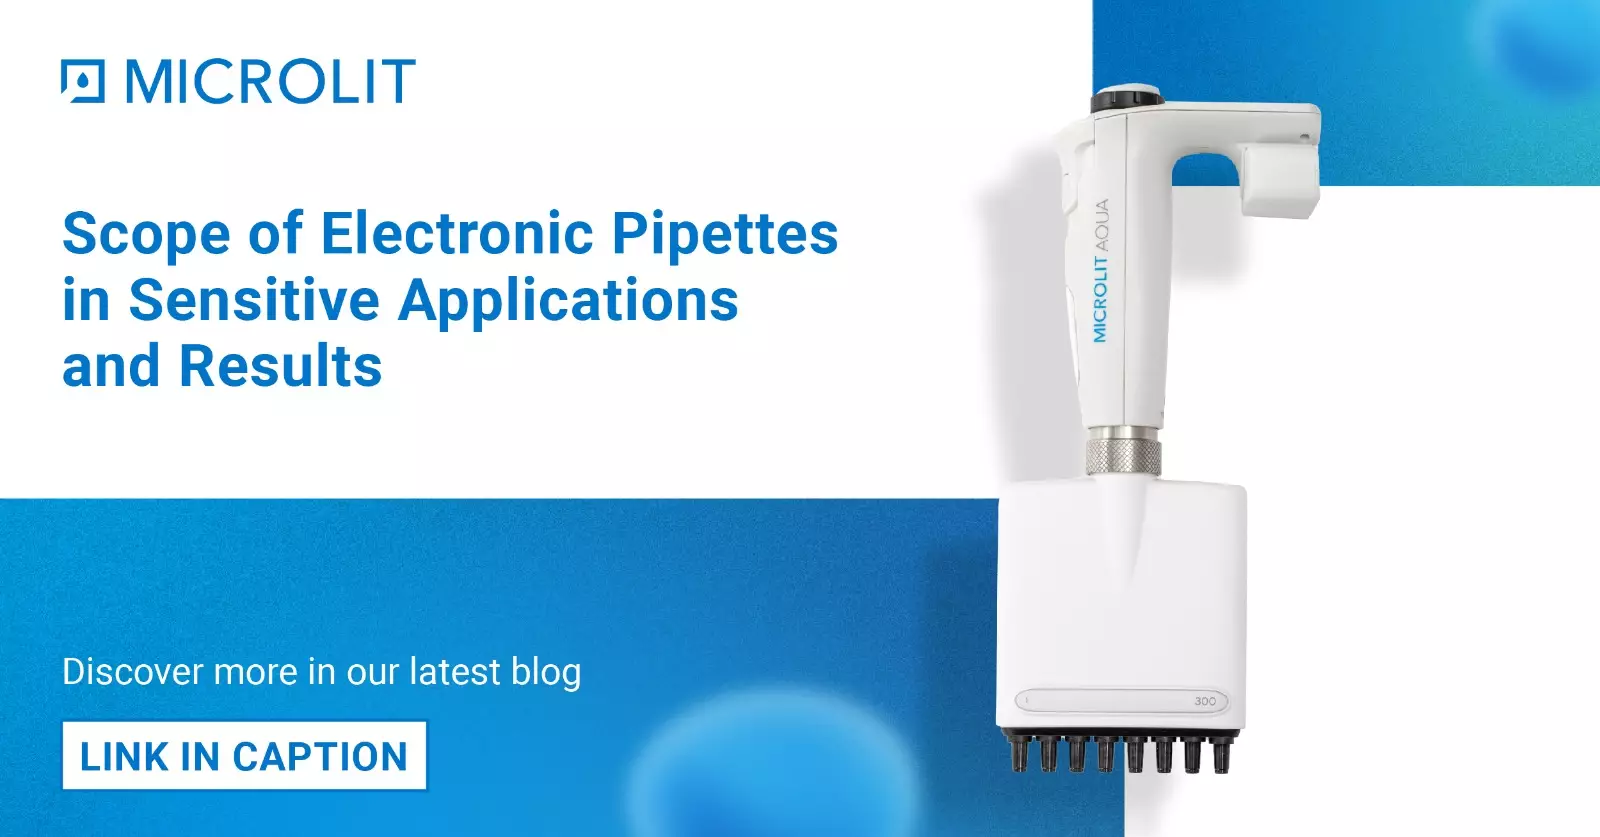 The Scope of Electronic Pipettes in Sensitive Applications and Results